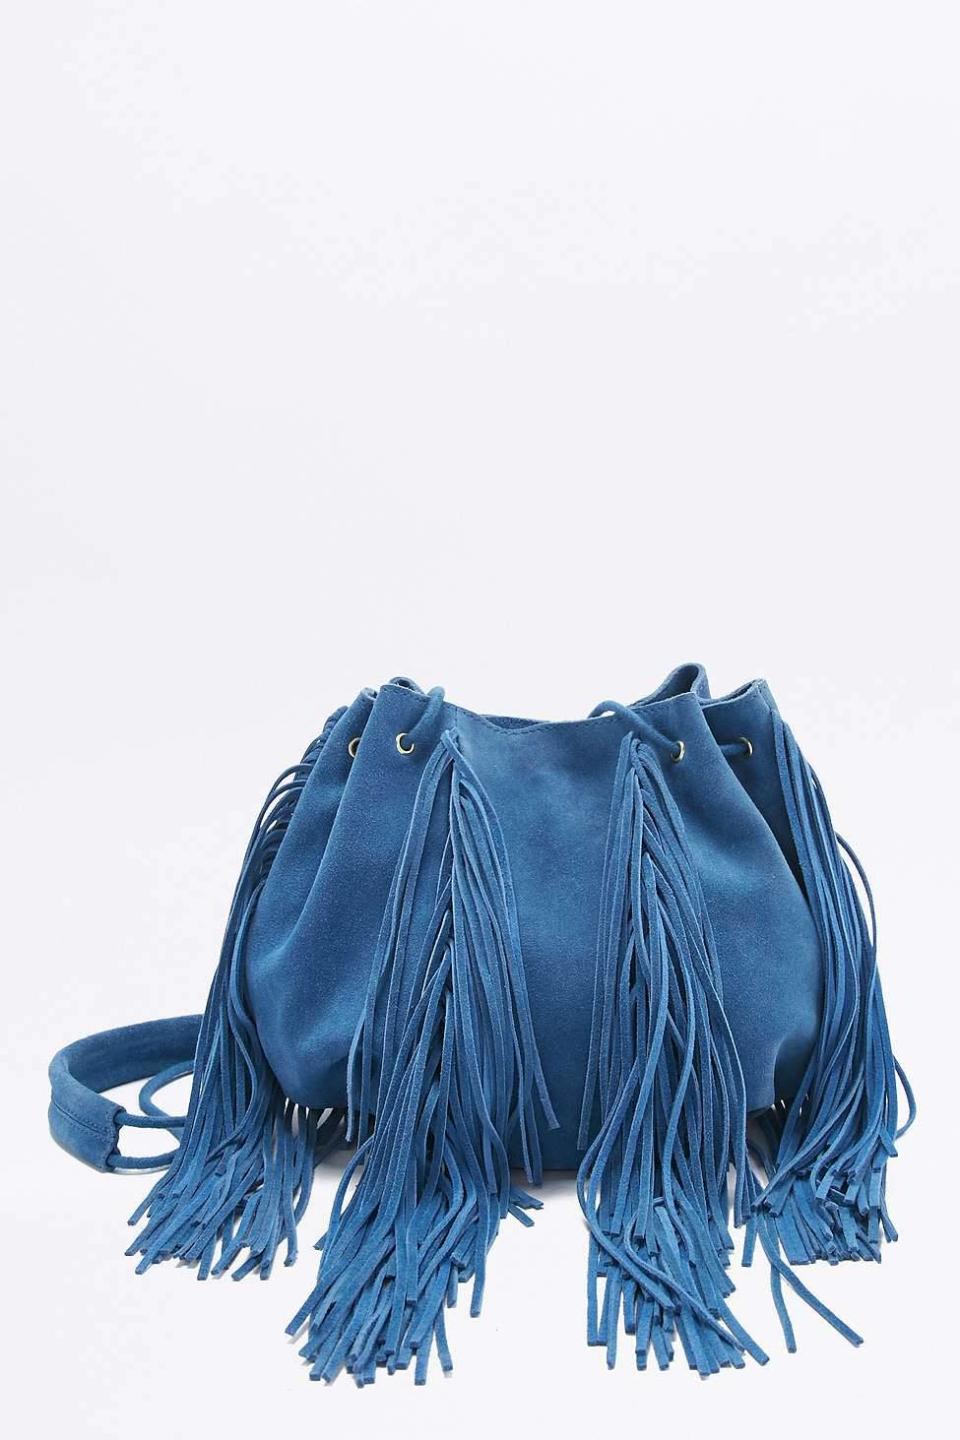 Make a statement with this blue fringe duffle bag. With its soft suede material and swinging 70s vibes you can’t go wrong.